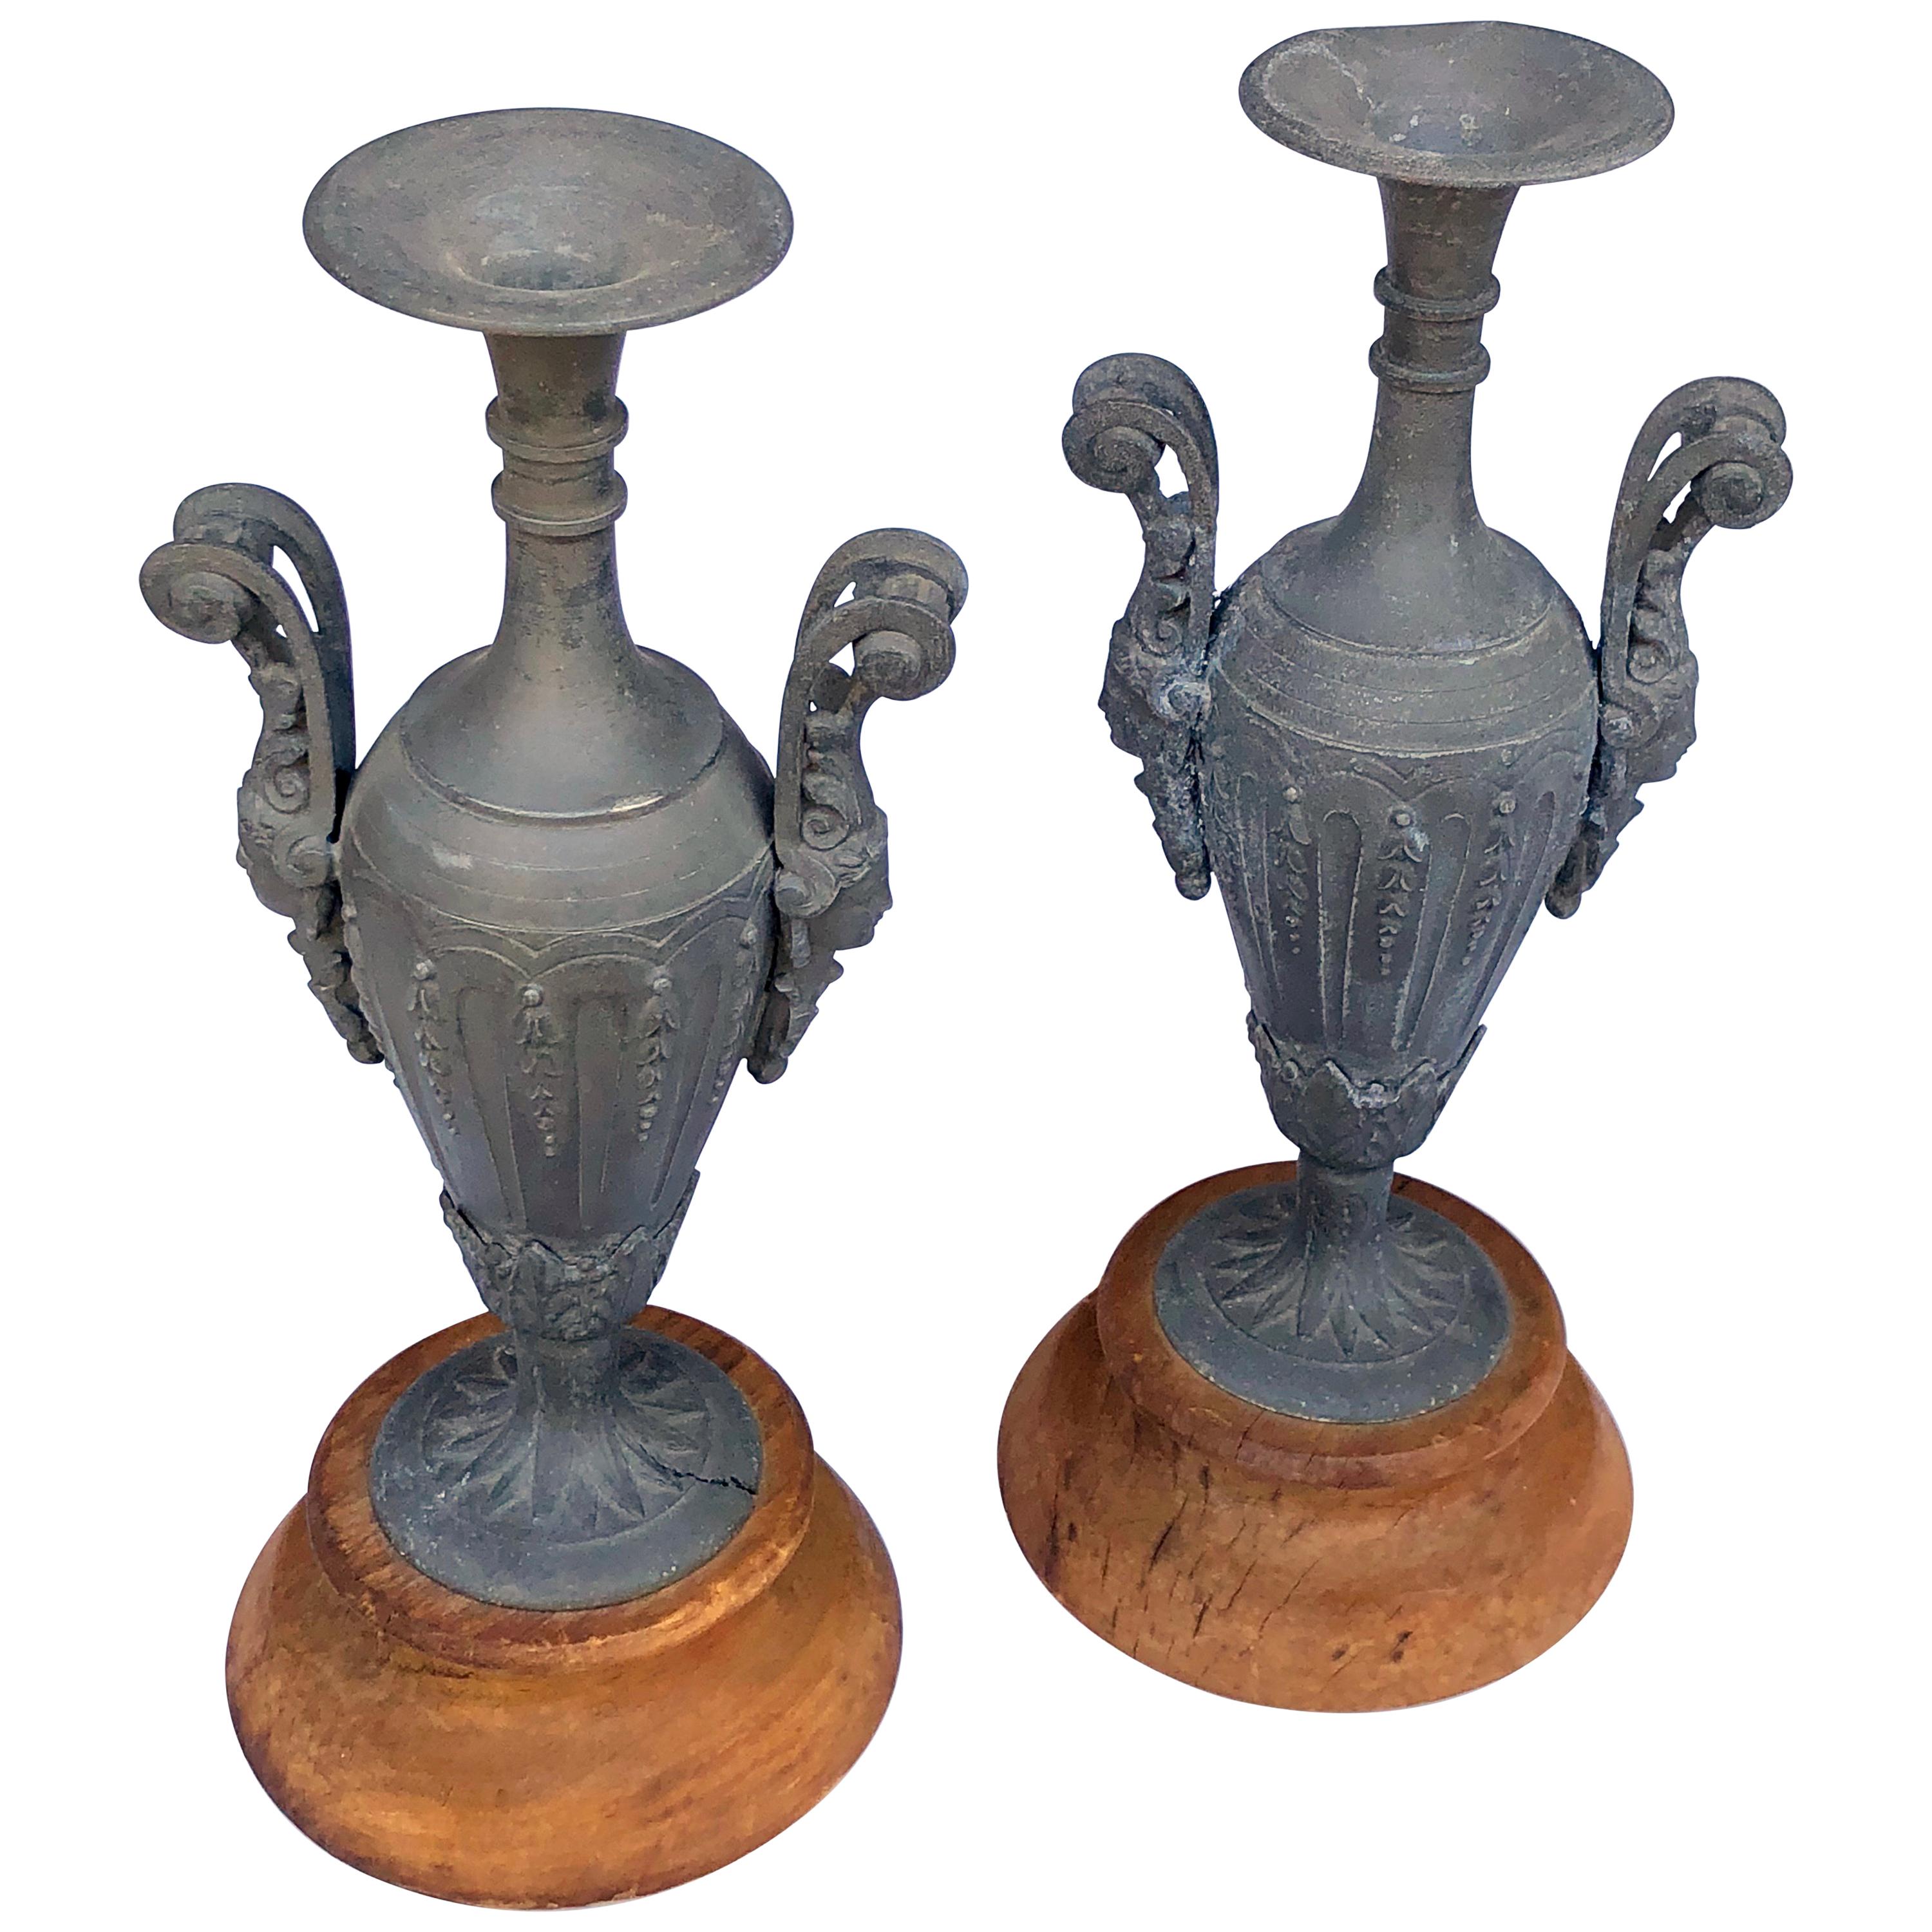 Elegant Pair of French Louis XVI Style Double-Handled Spelter-Metal Urns For Sale